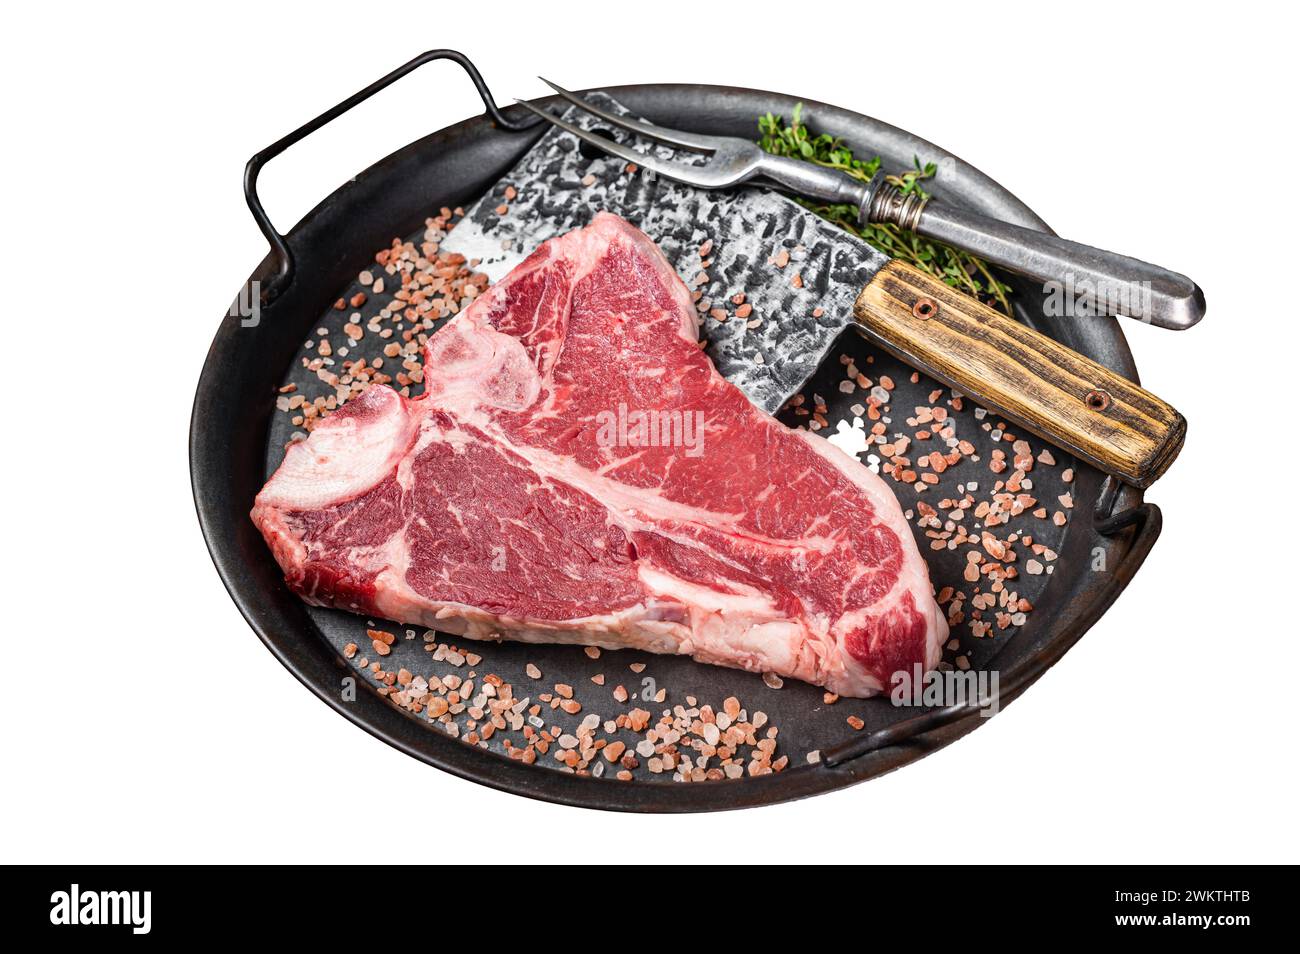 Raw Florentine steak or T bone steak, marbled beef meat in a steel kitchen tray. Isolated on white background Stock Photo